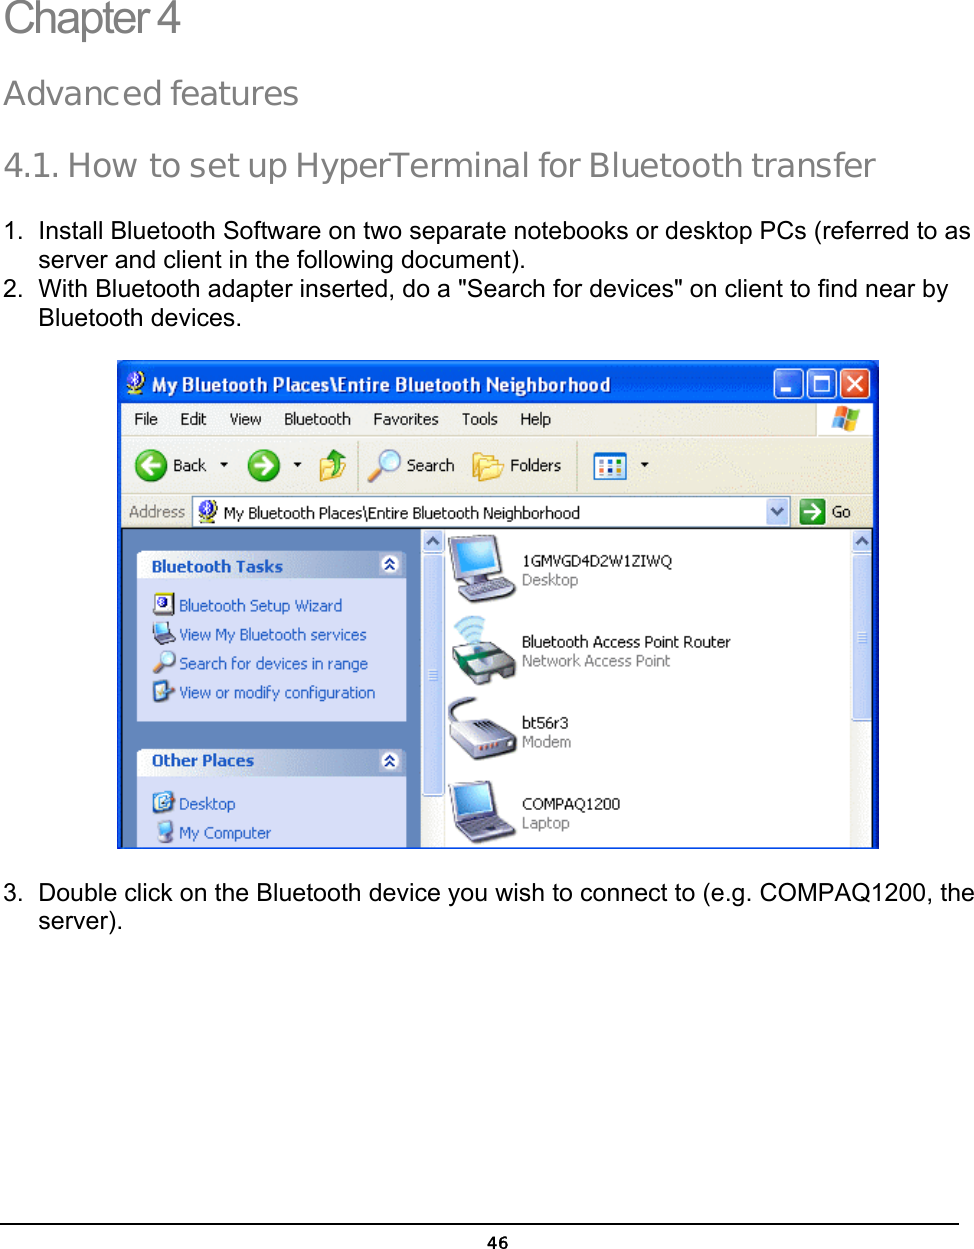   46Chapter 4 Advanced features 4.1. How to set up HyperTerminal for Bluetooth transfer 1.  Install Bluetooth Software on two separate notebooks or desktop PCs (referred to as server and client in the following document). 2.  With Bluetooth adapter inserted, do a &quot;Search for devices&quot; on client to find near by Bluetooth devices.  3.  Double click on the Bluetooth device you wish to connect to (e.g. COMPAQ1200, the server).  4  4 